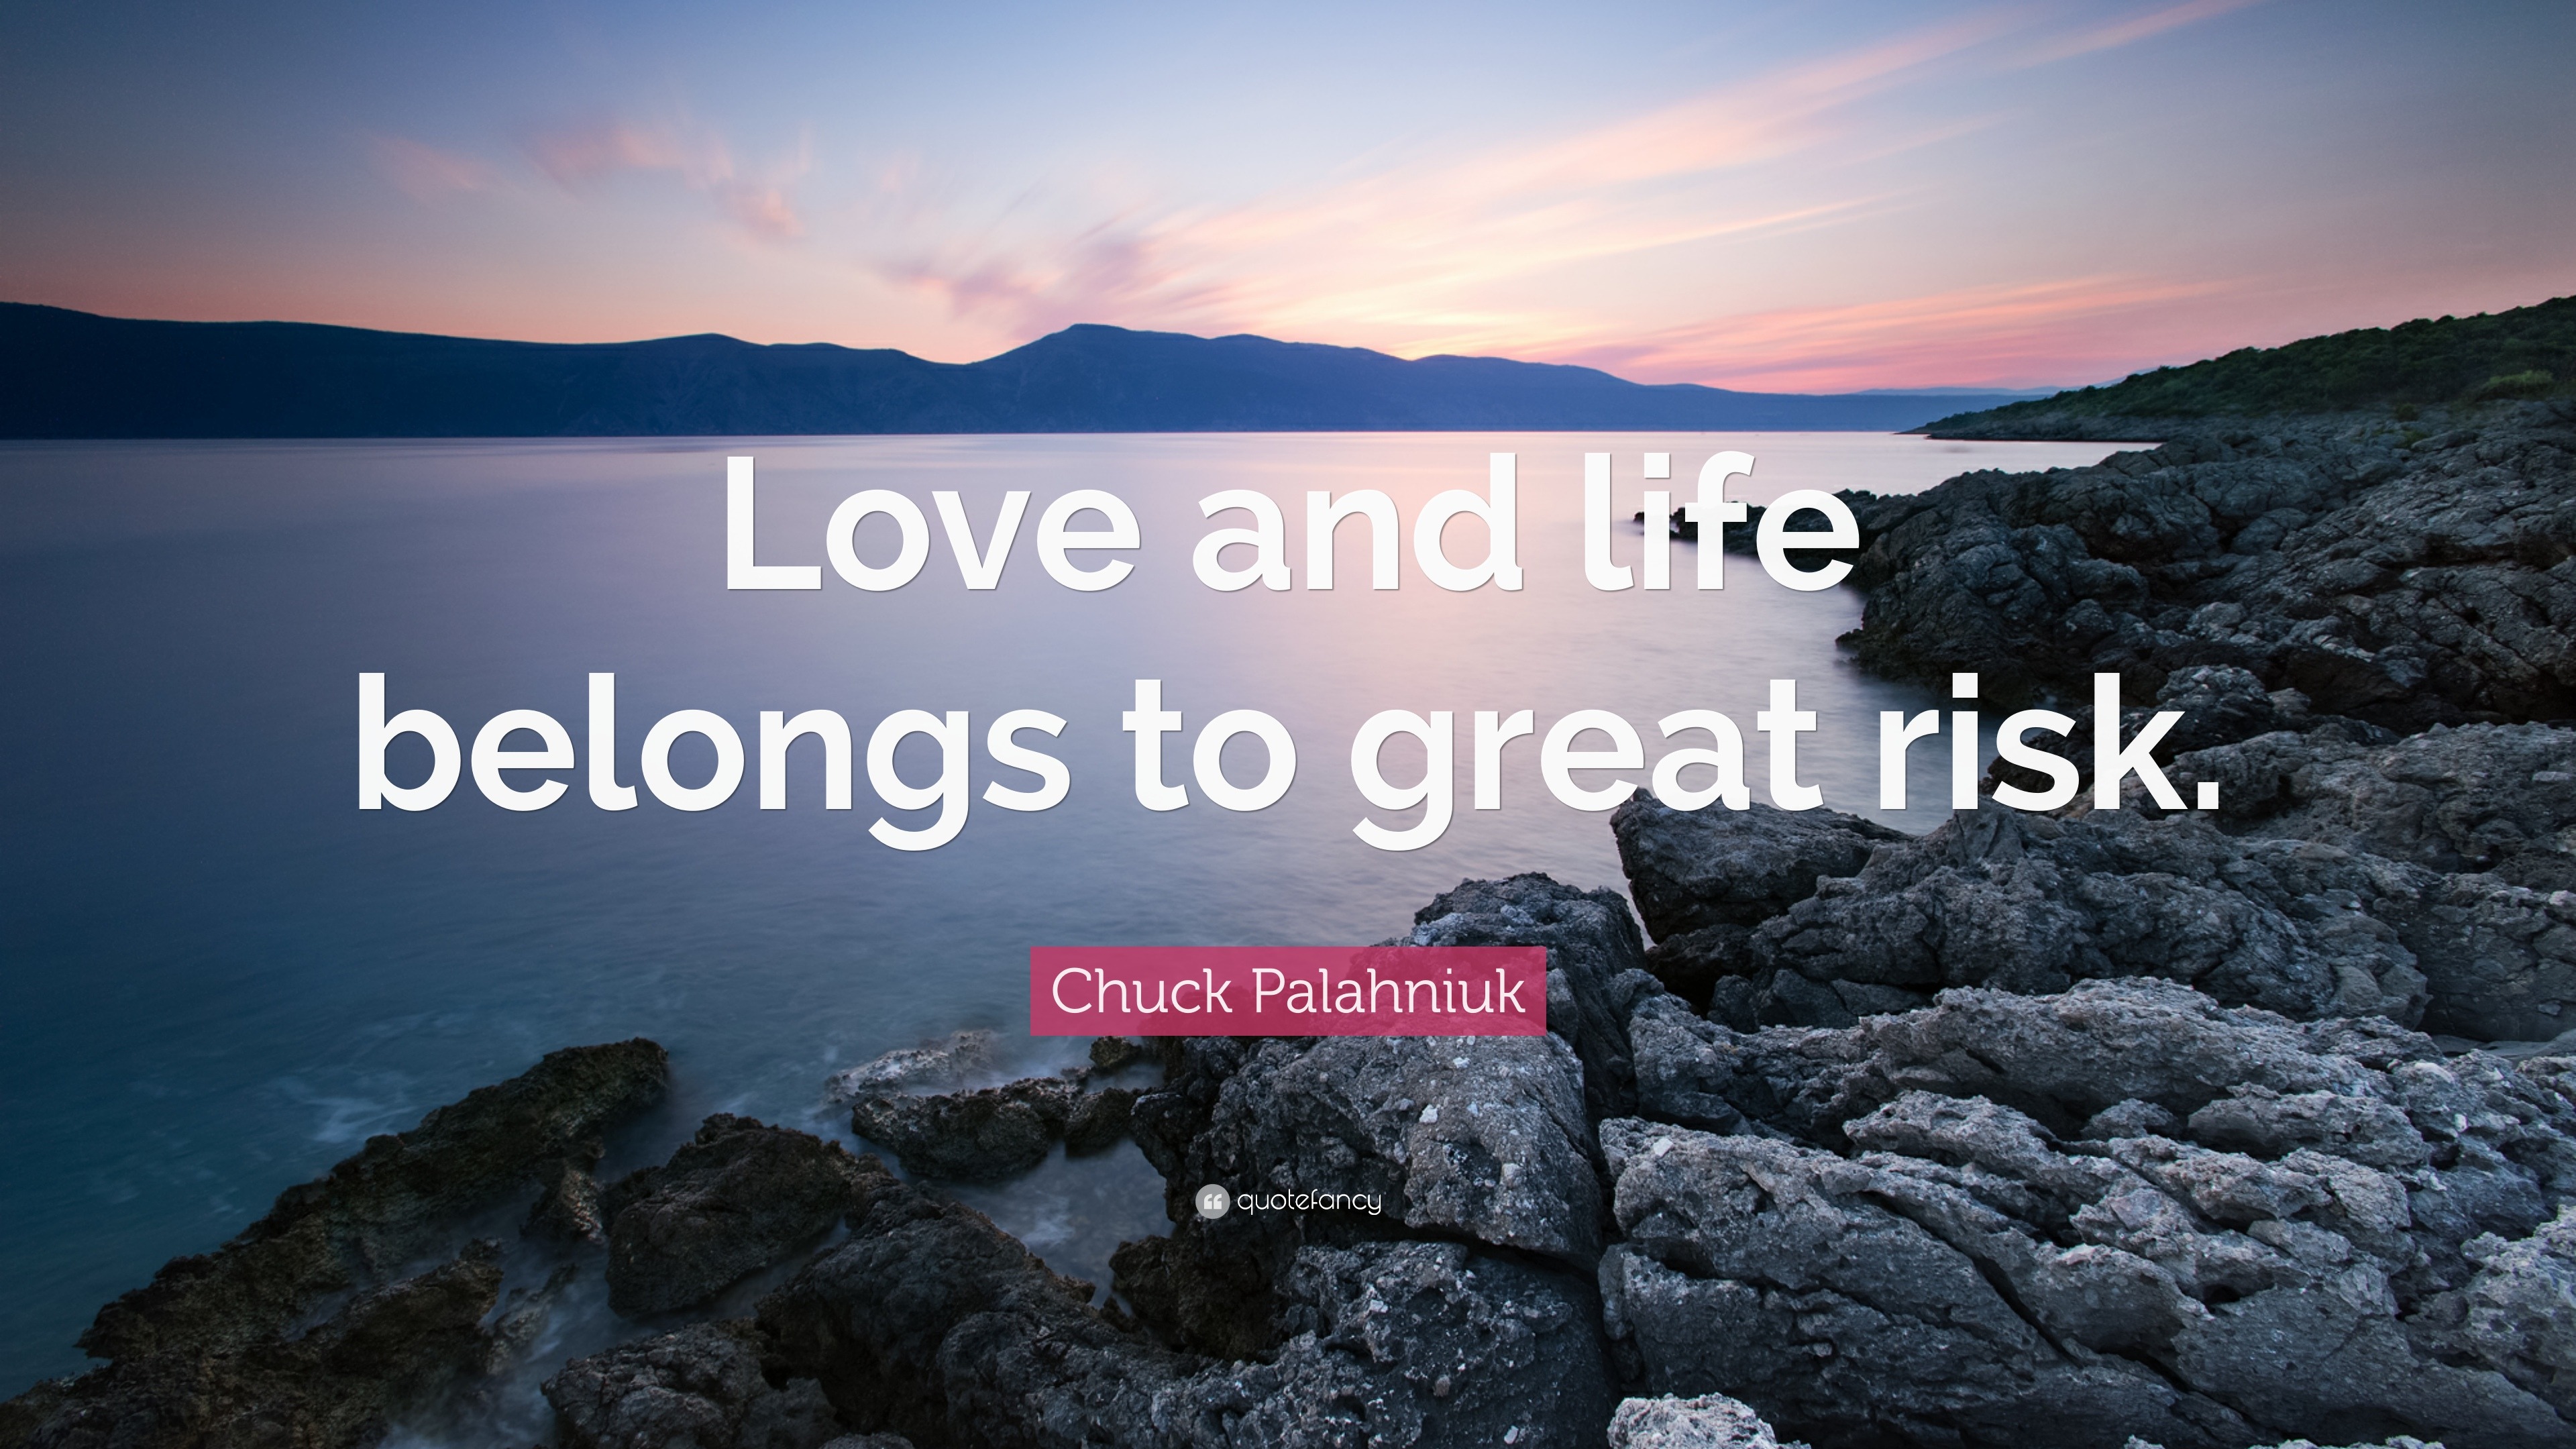 Chuck Palahniuk Quote “Love and life belongs to great risk ”